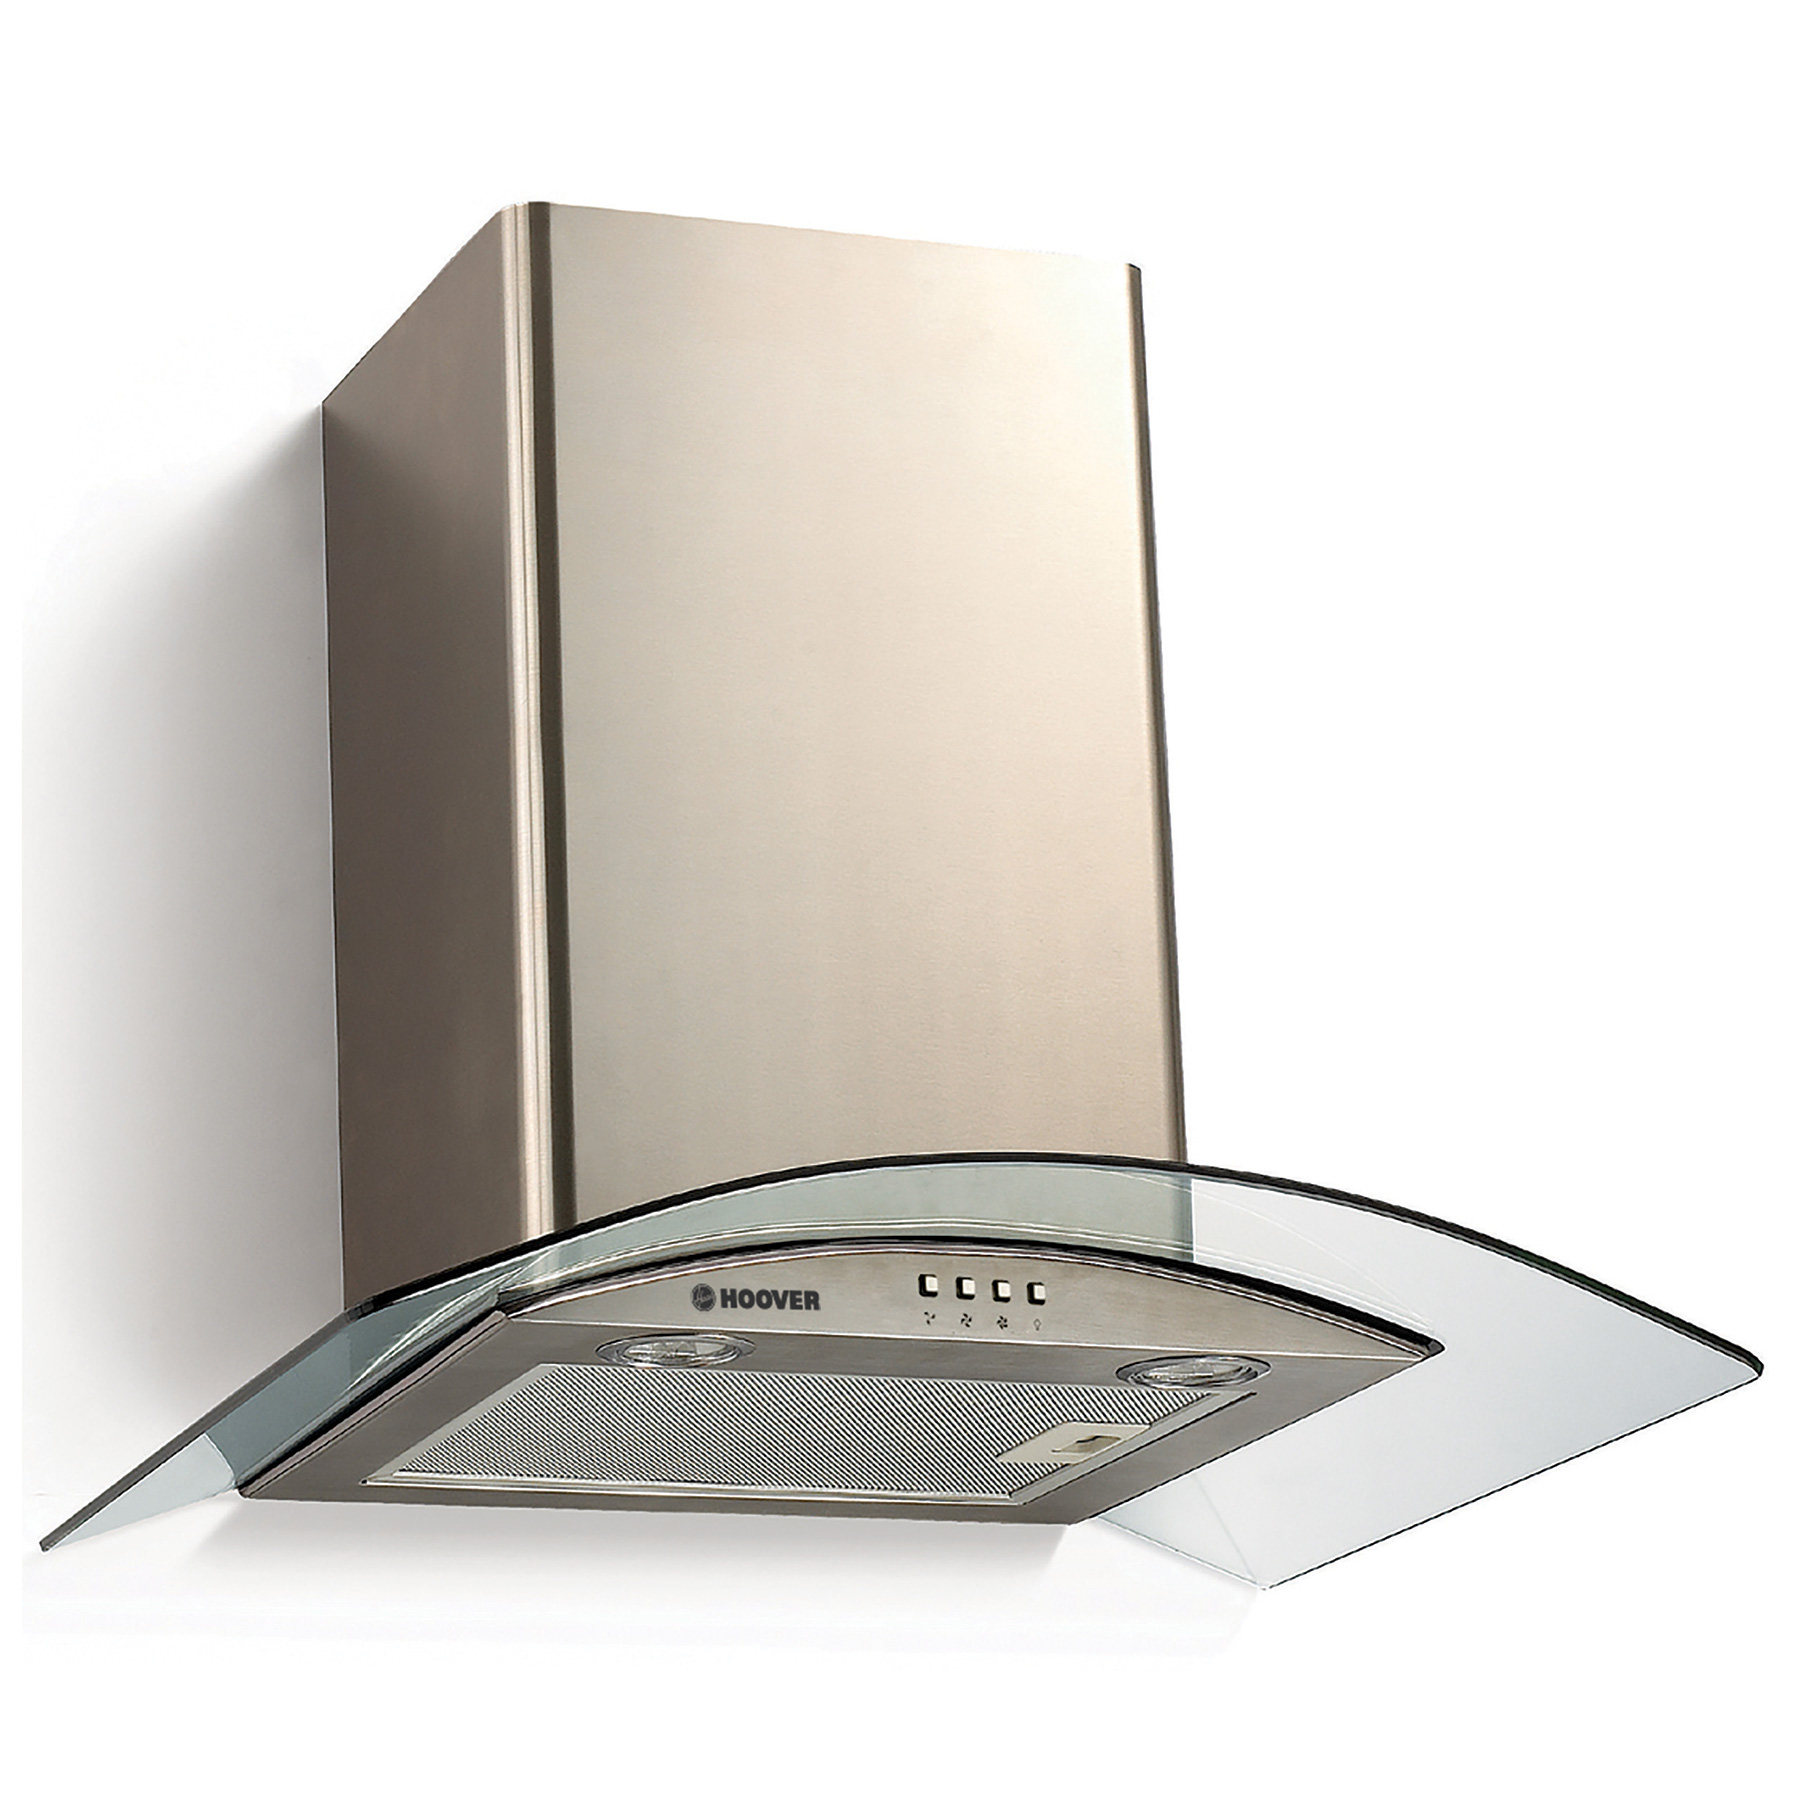 Image of Hoover HGM610NX 60cm Curved Glass Chimney Hood in St Steel 3 Speed Fan